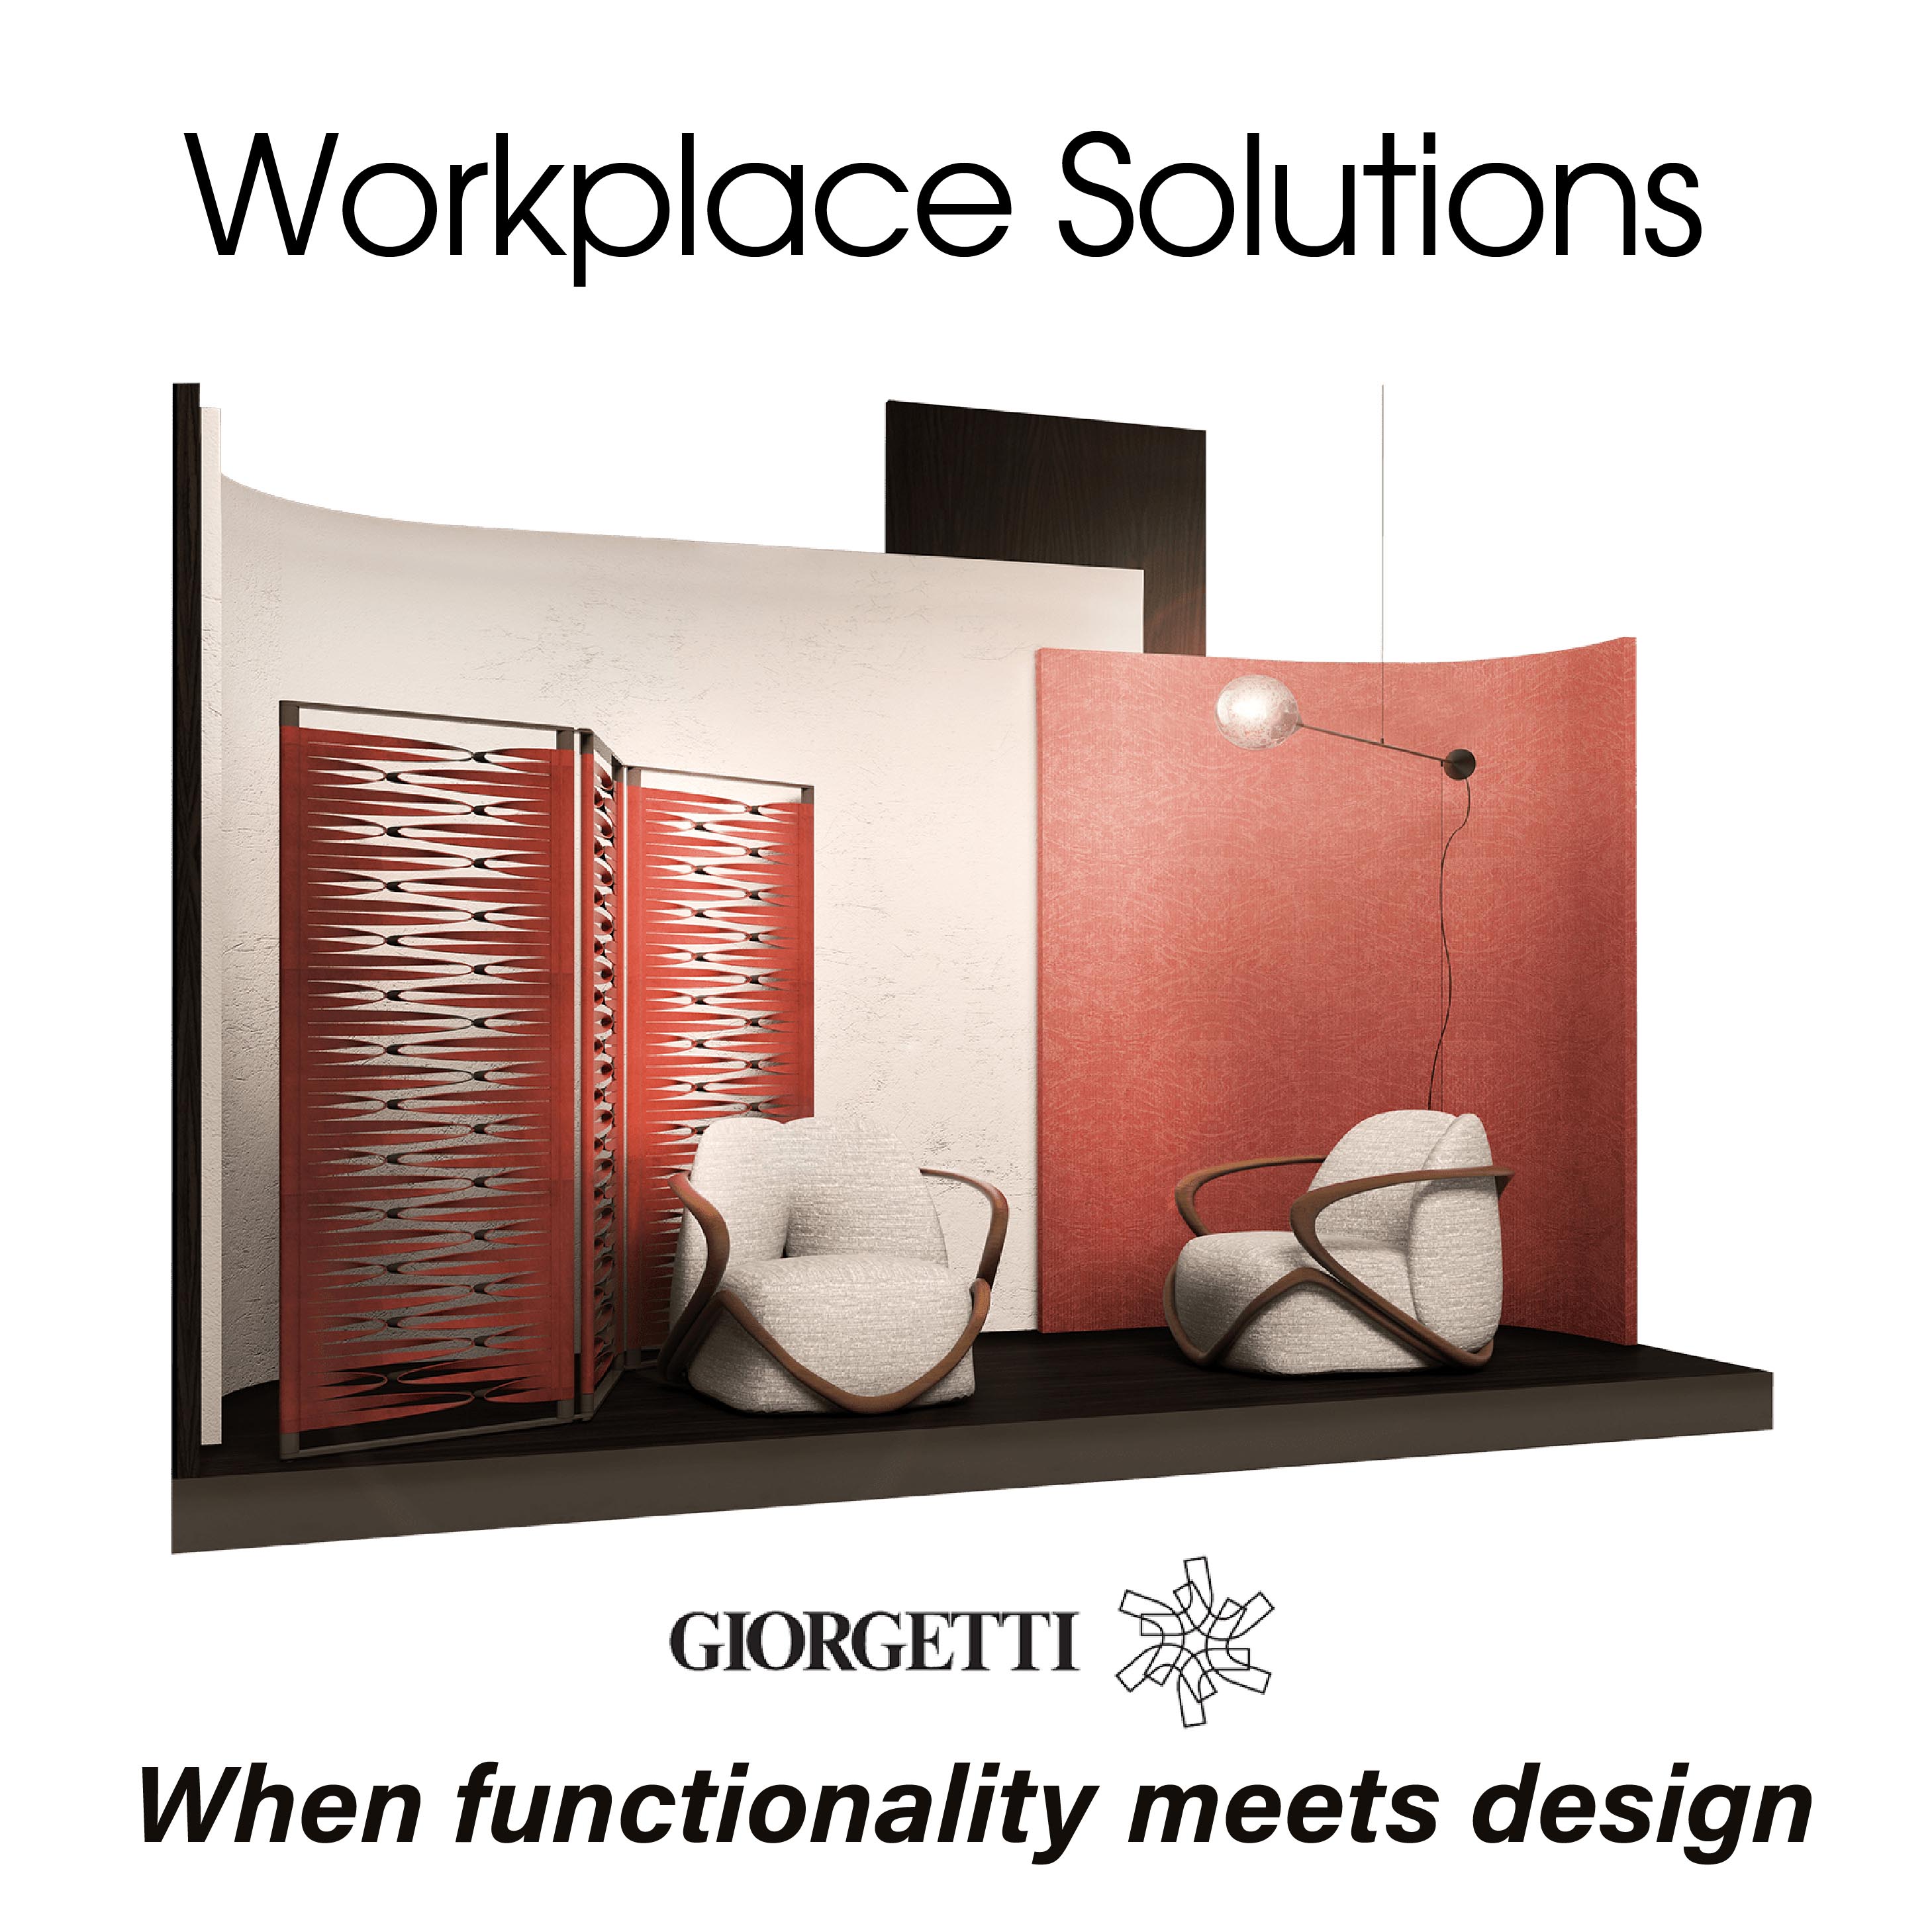 Workplace Solutions | Office furniture, Giorgetti style